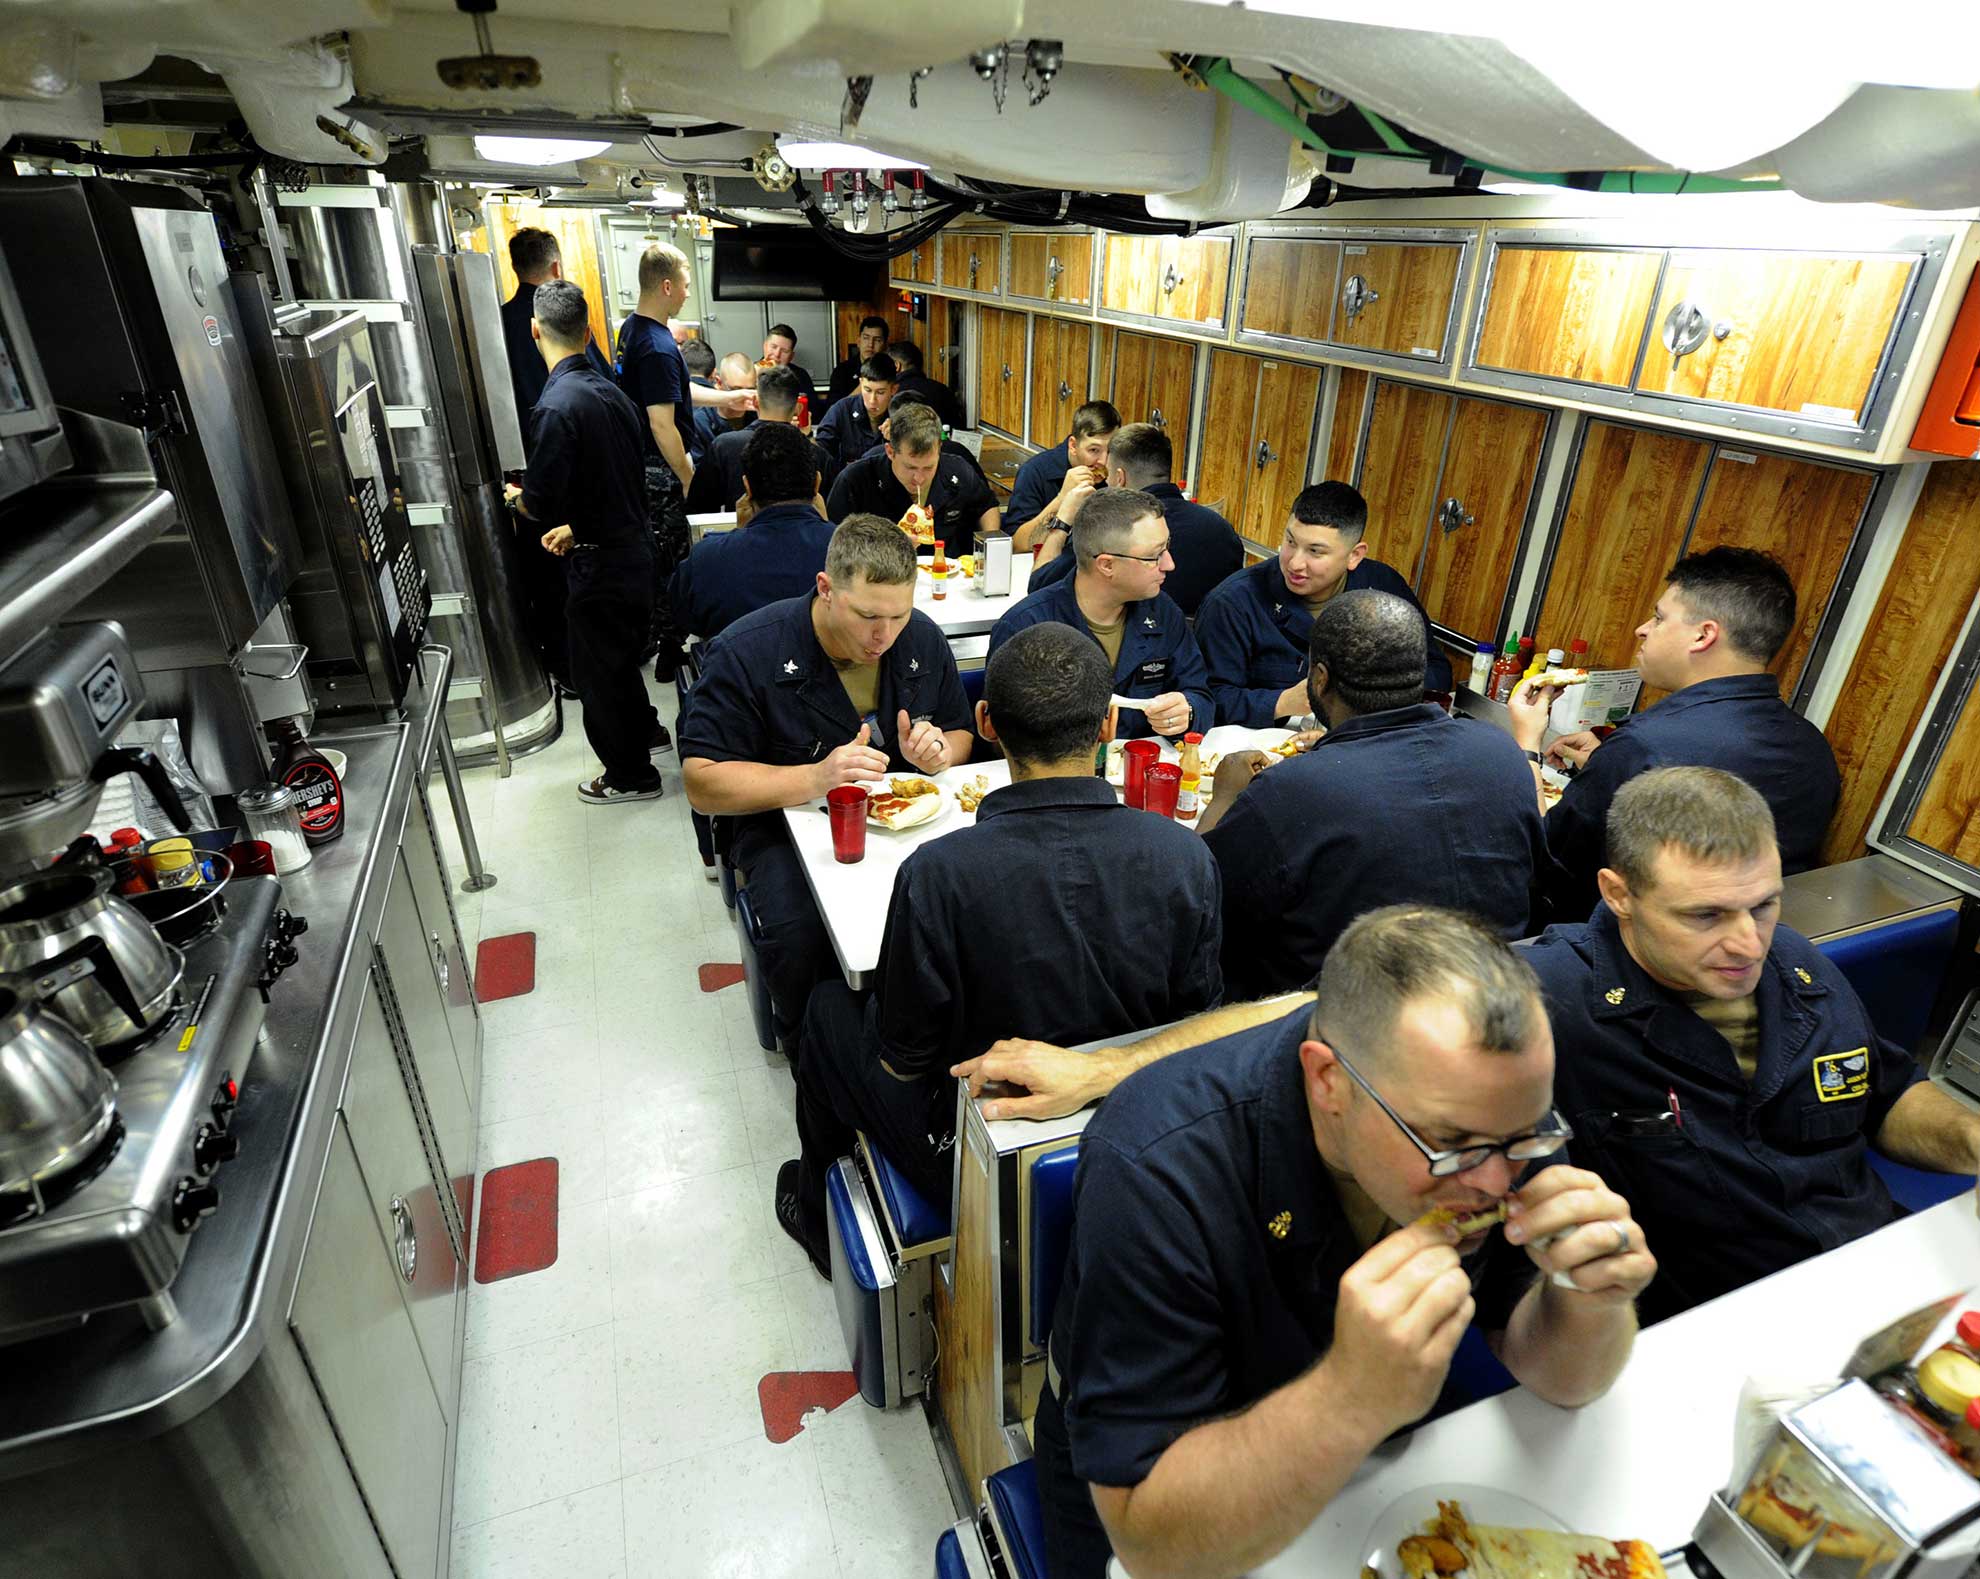 Atlantic Ocean (June 23, 2018) Sailors assigned to the Virginia-class fast attack submarine Pre-Commissioning Unit (PCU) Indiana (SSN 789) eat dinner in the crew's mess while underway. Indiana is the 16th Virginia-class fast attack submarine and is scheduled to be commissioned Sept. 29, 2018 -- U.S. Navy photo by Chief MCS Darryl Wood. -